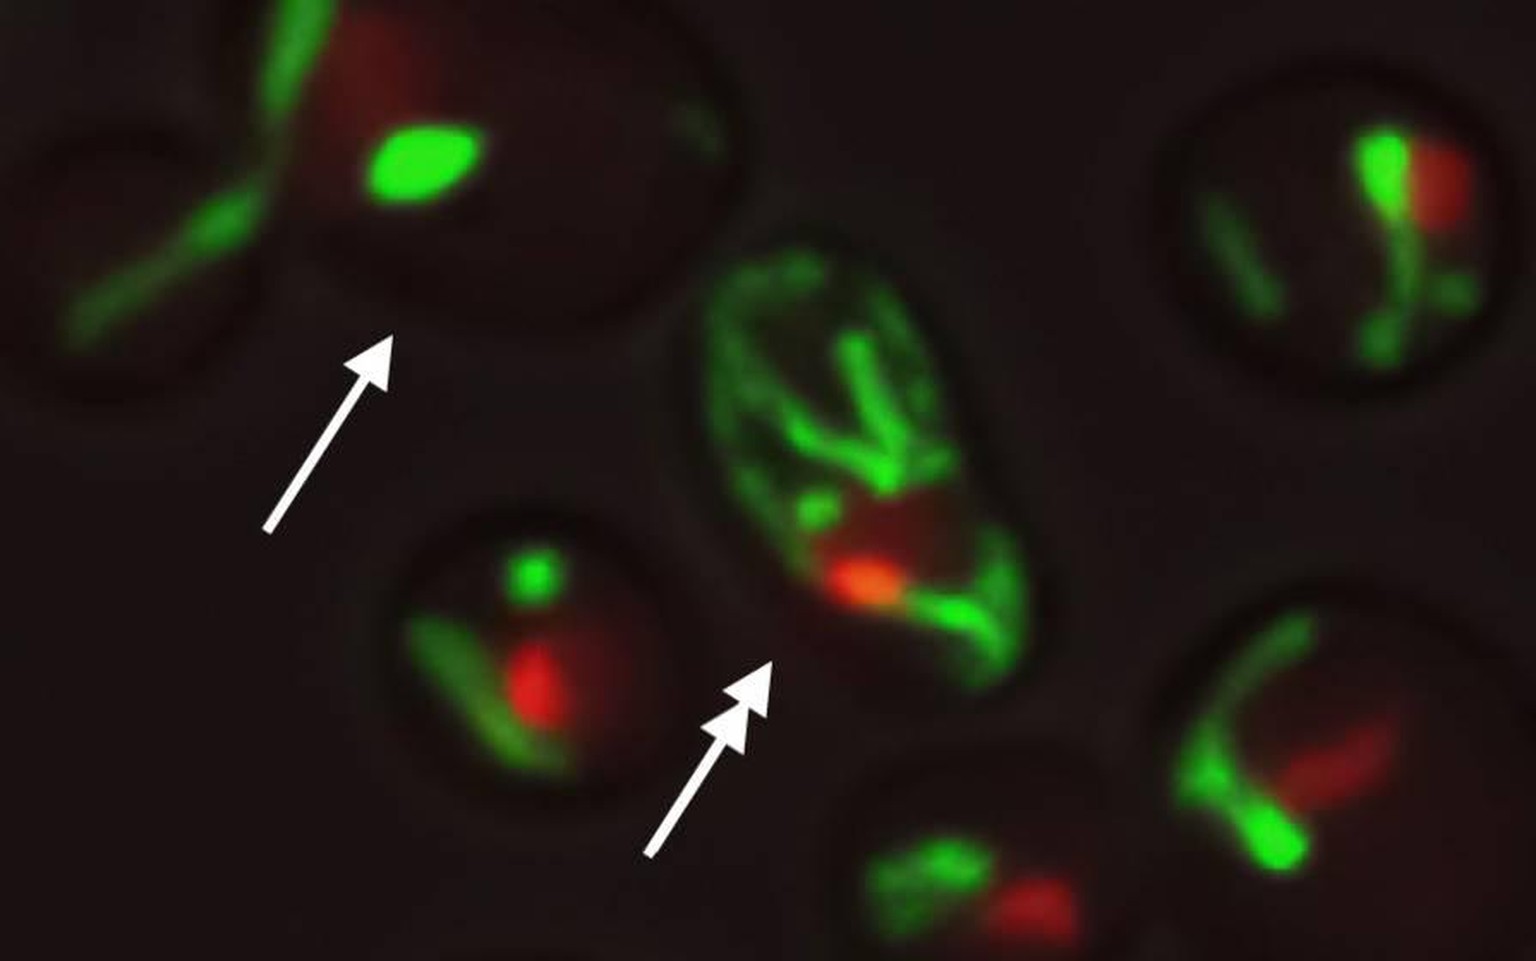 Yeast cells with the same DNA under the same environment show different structures of mitochondria (green) and the nucleolus (red), which may underlie the causes of different aging paths. Single and d ...